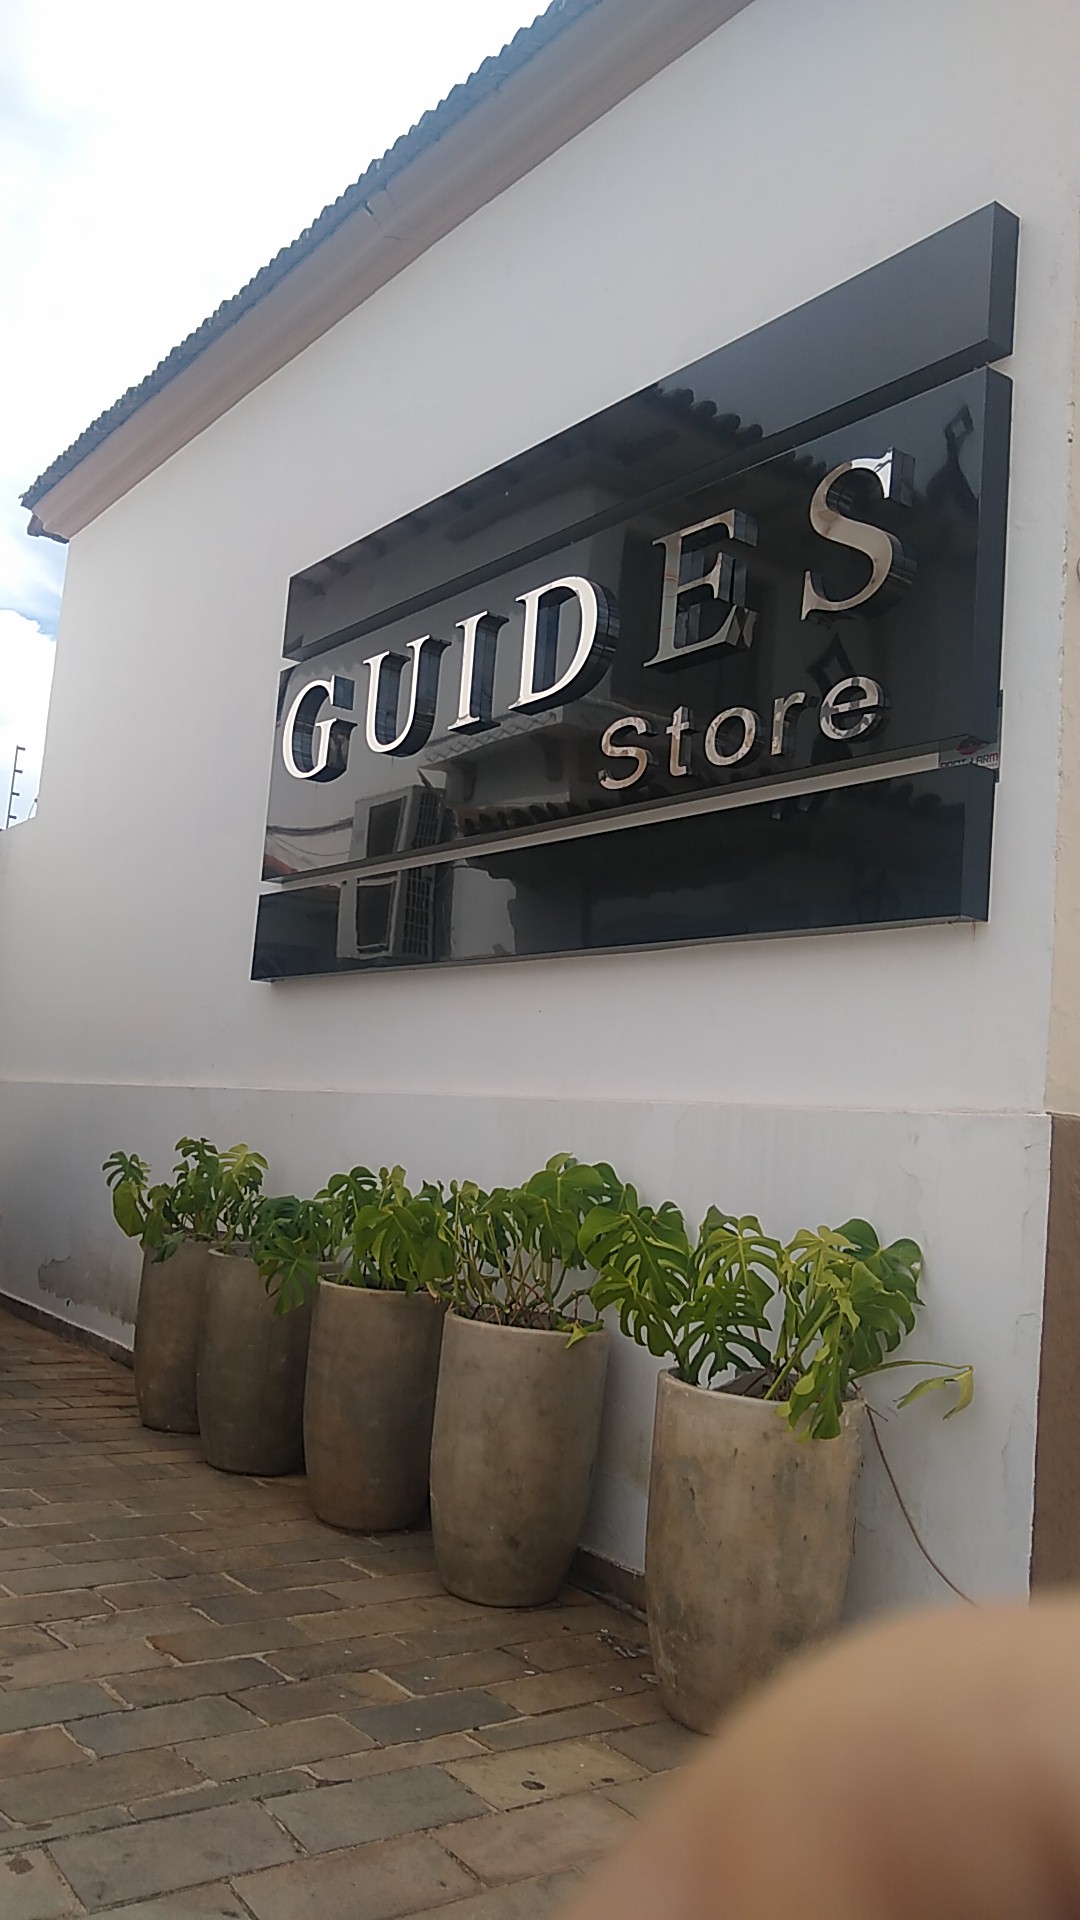 Guides Stores